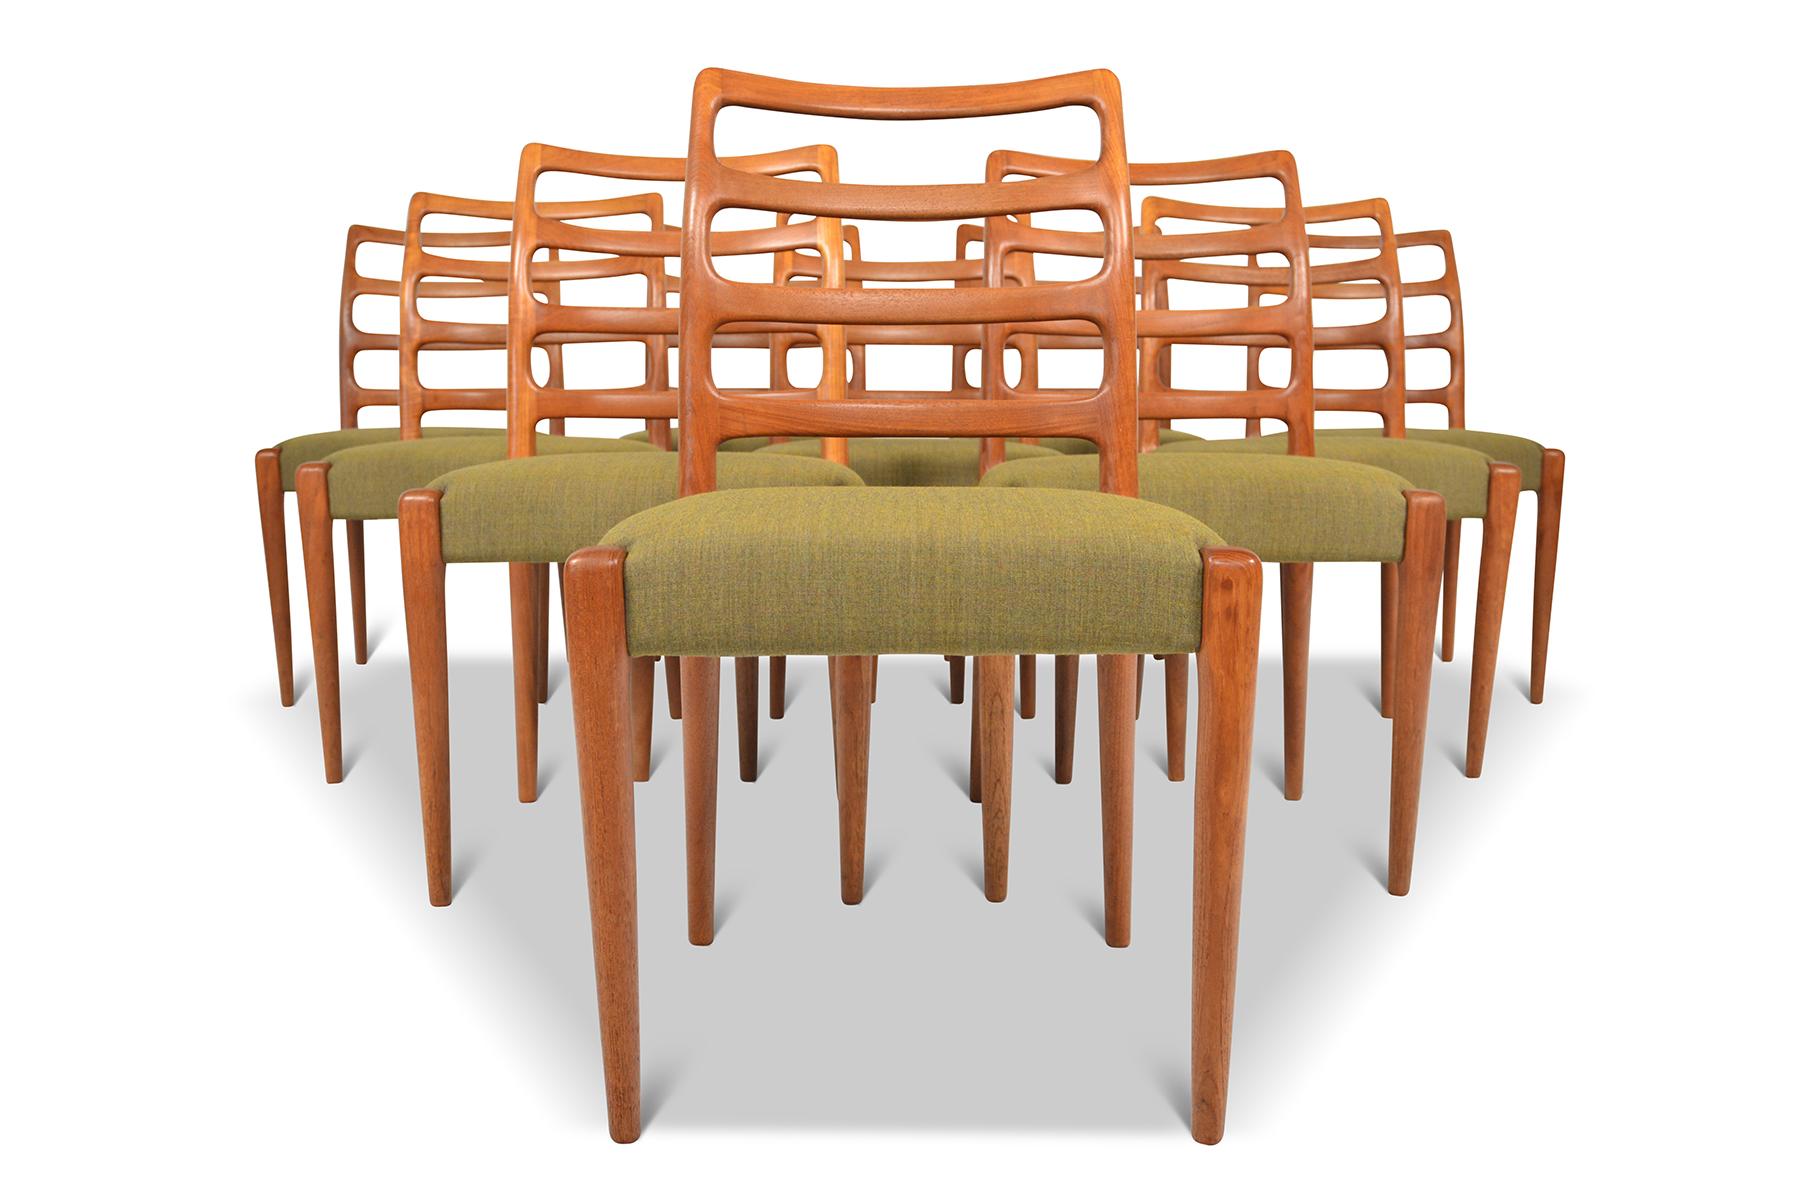 Origin: Denmark
Designer: Unknown
Manufacturer: Unknown
Era: 1960s
Measurements: 19.5 wide x 17.5 deep x 34 tall, seat height 18.5 tall

Condition:
Frames have been fully restored. New upholstery with fresh foam in Kvadrat Remix wool.